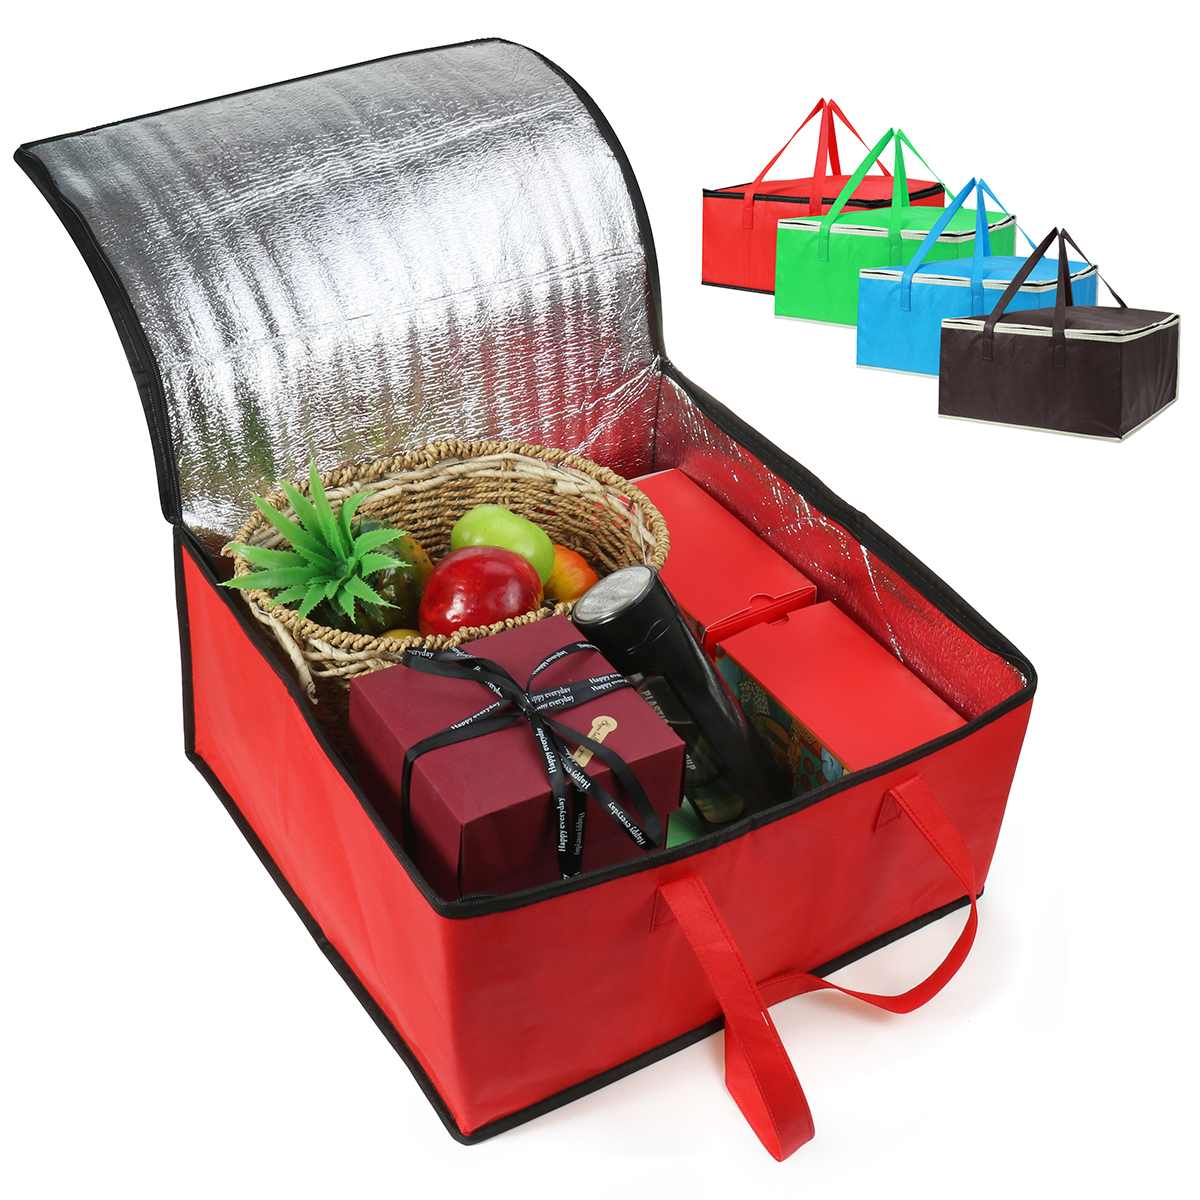 Pizza Delivery Bag Thermal Container